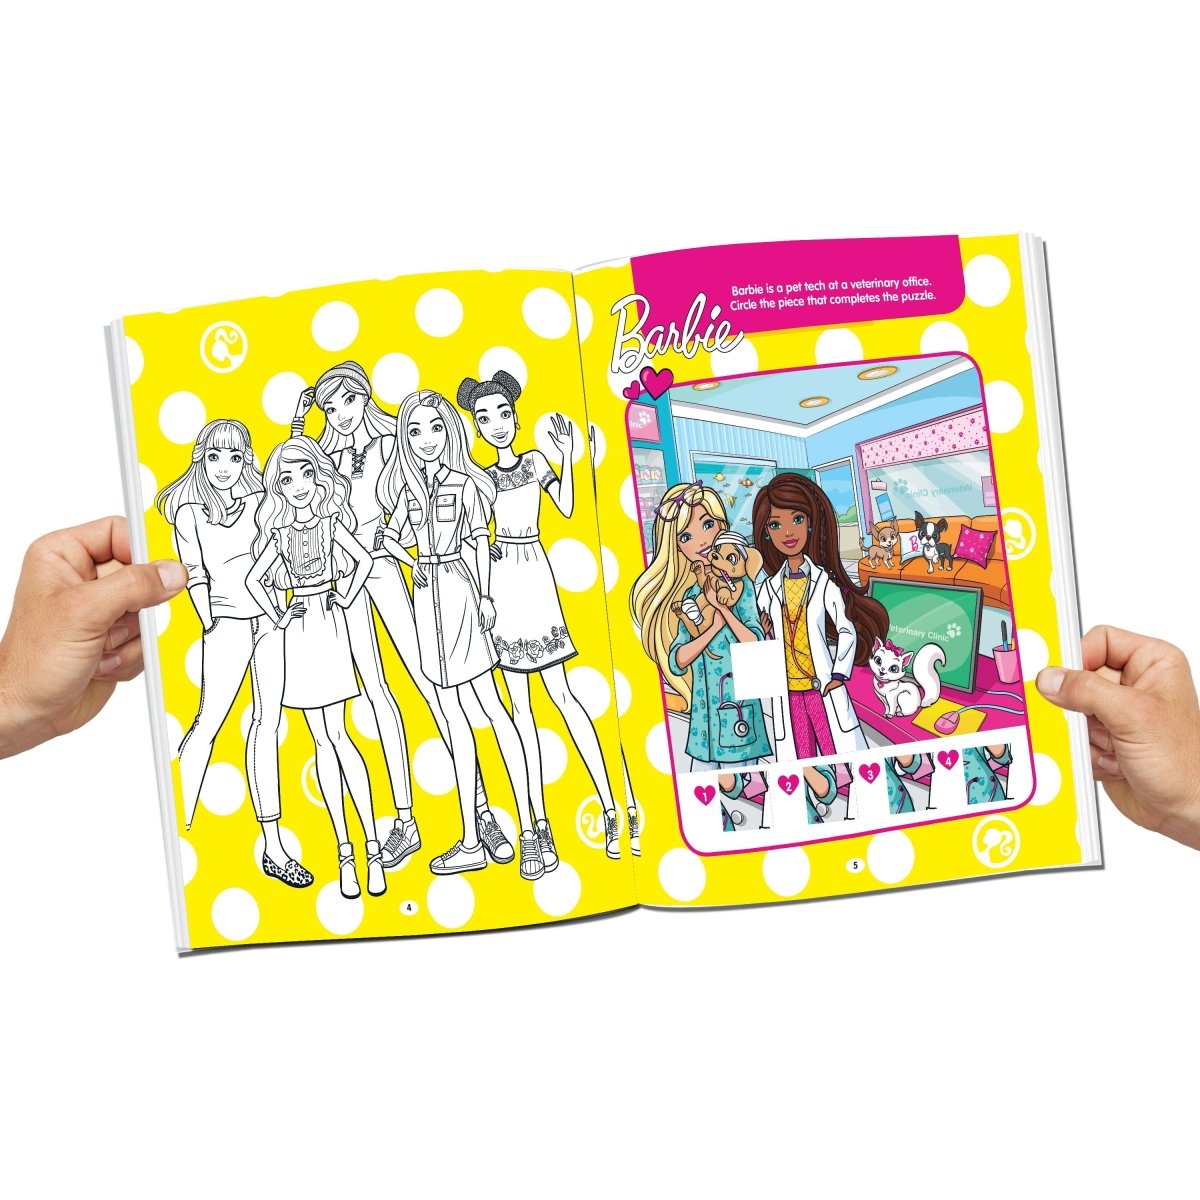 Dreamland Publications Barbie Colouring And Activity Books Pack (A Pack of 4 Books) - 9789394767775